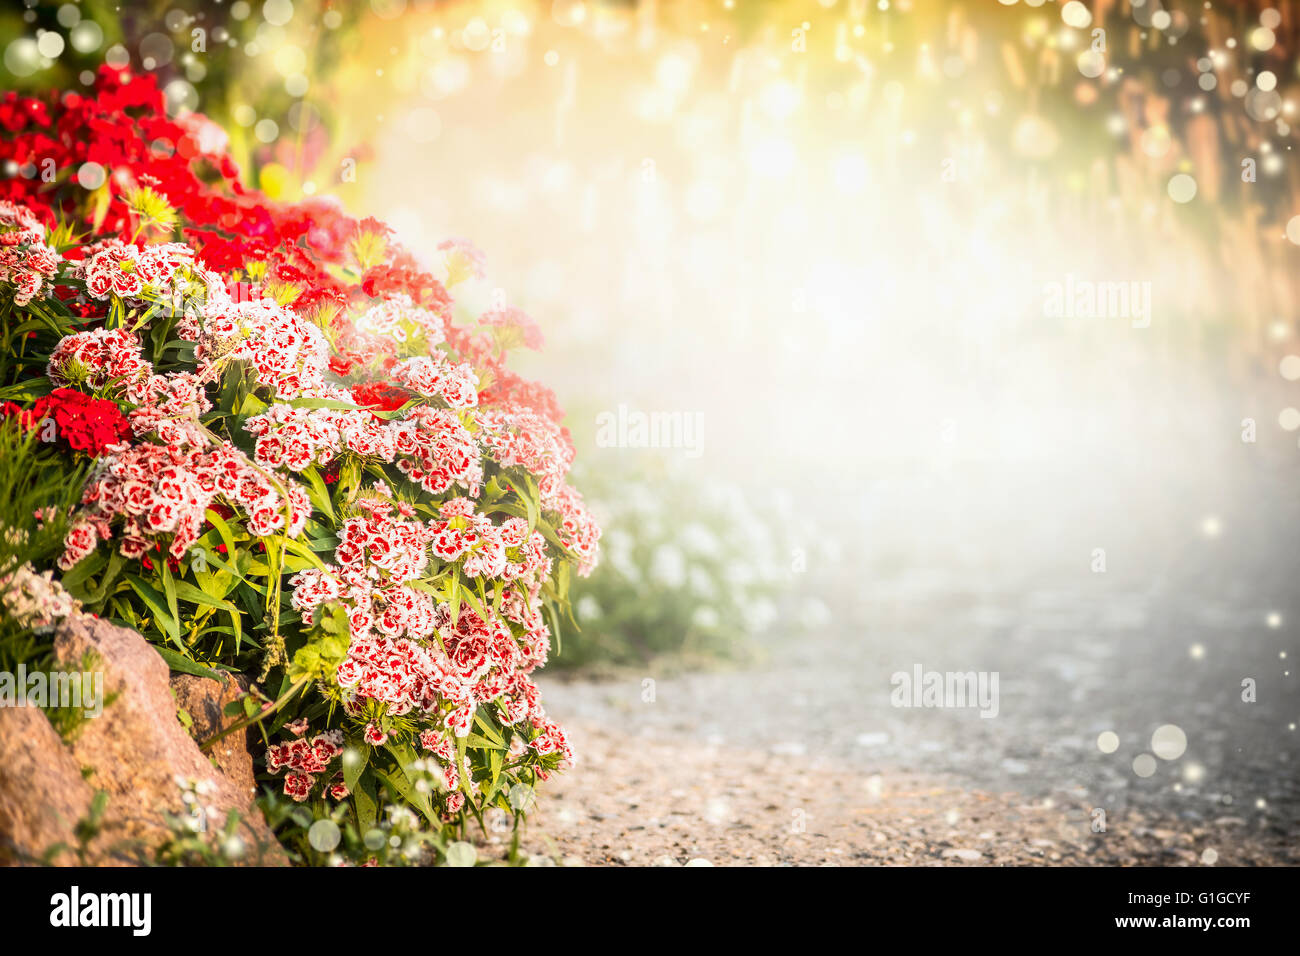 Beautiful flowers garden background. Turkish carnation flowers on flowers  bed. Outdoor garden or park background Stock Photo - Alamy